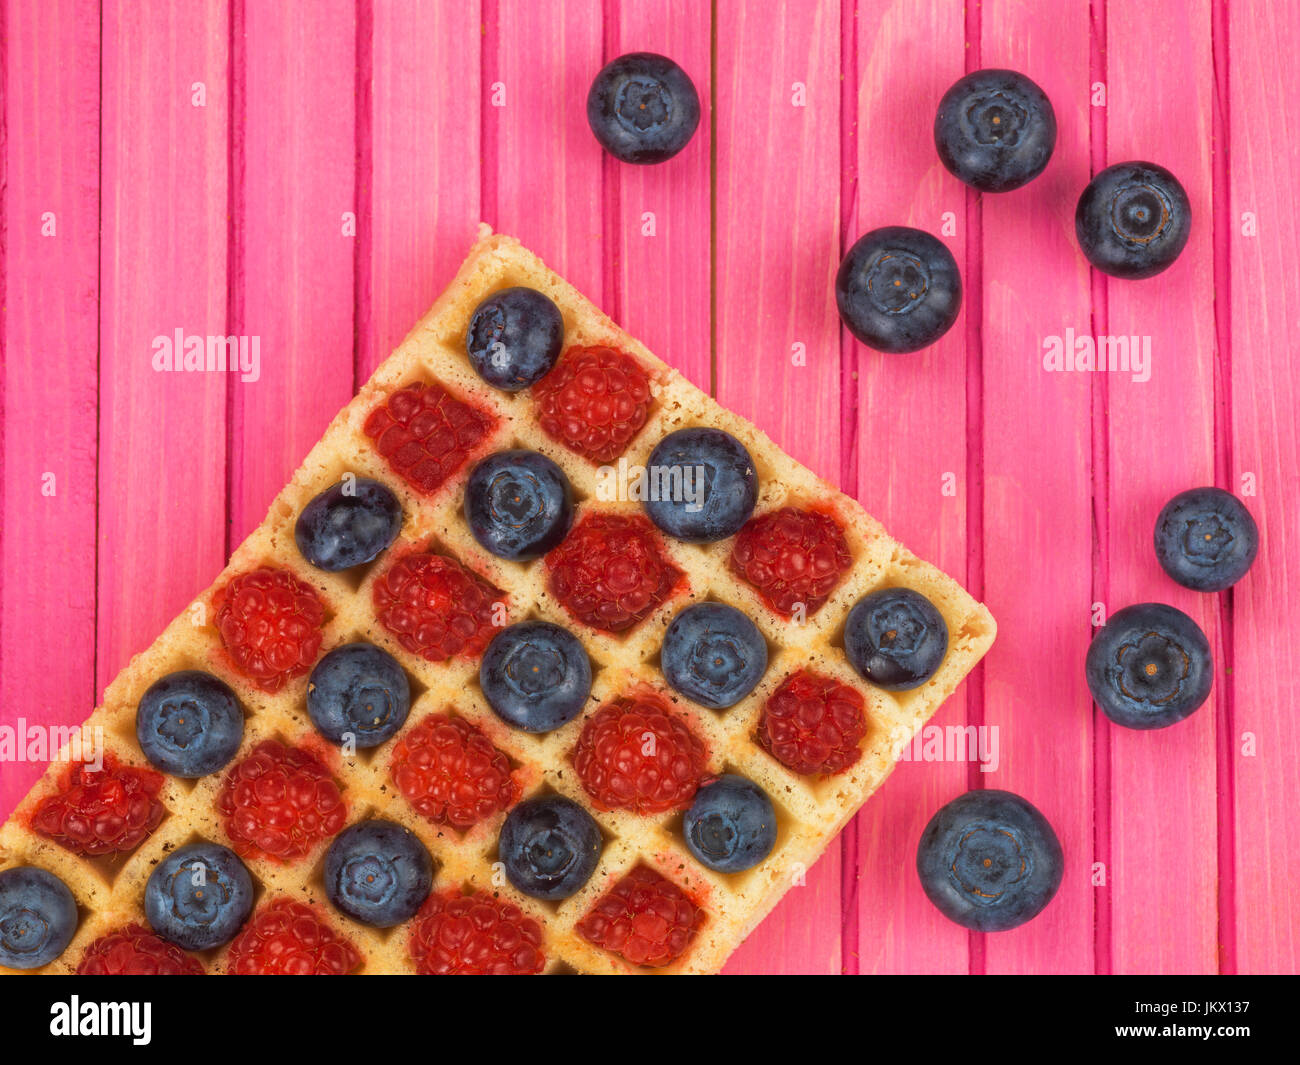 Raspberries and Blueberries on a Toasted Waffle Against a Pink Wooden Background Stock Photo